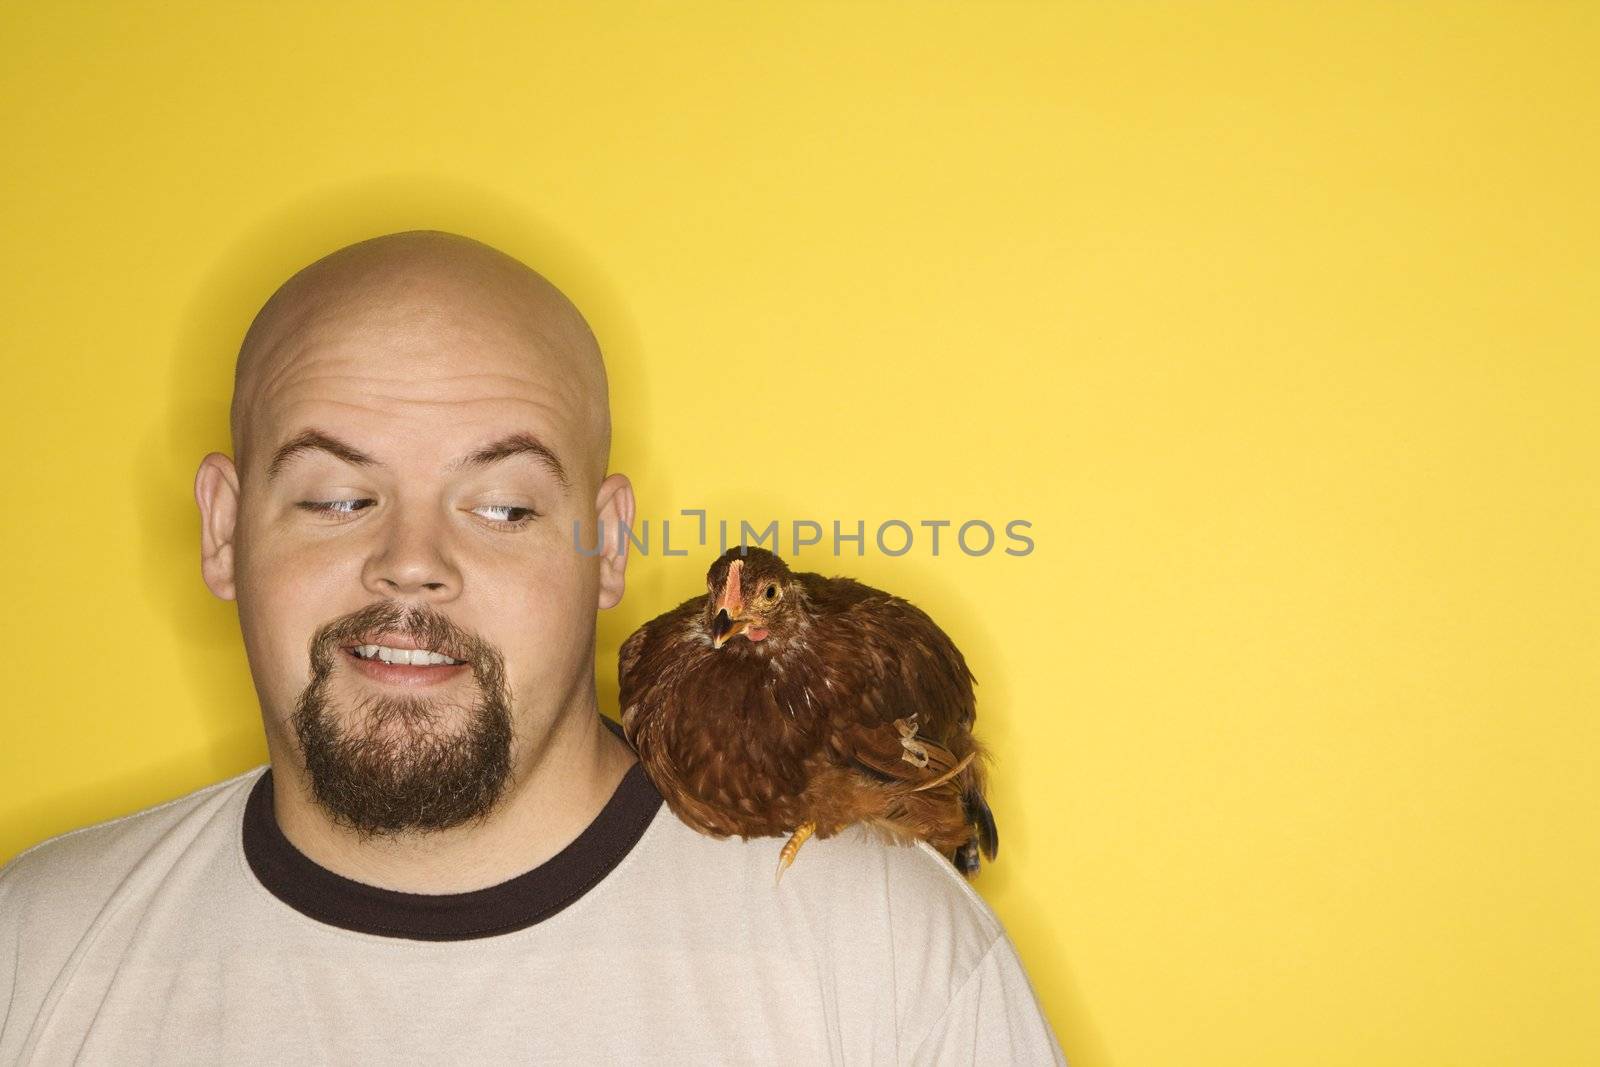 Caucasian mid-adult man looking at Golden Laced Wyandotte chicken on his shoulder.